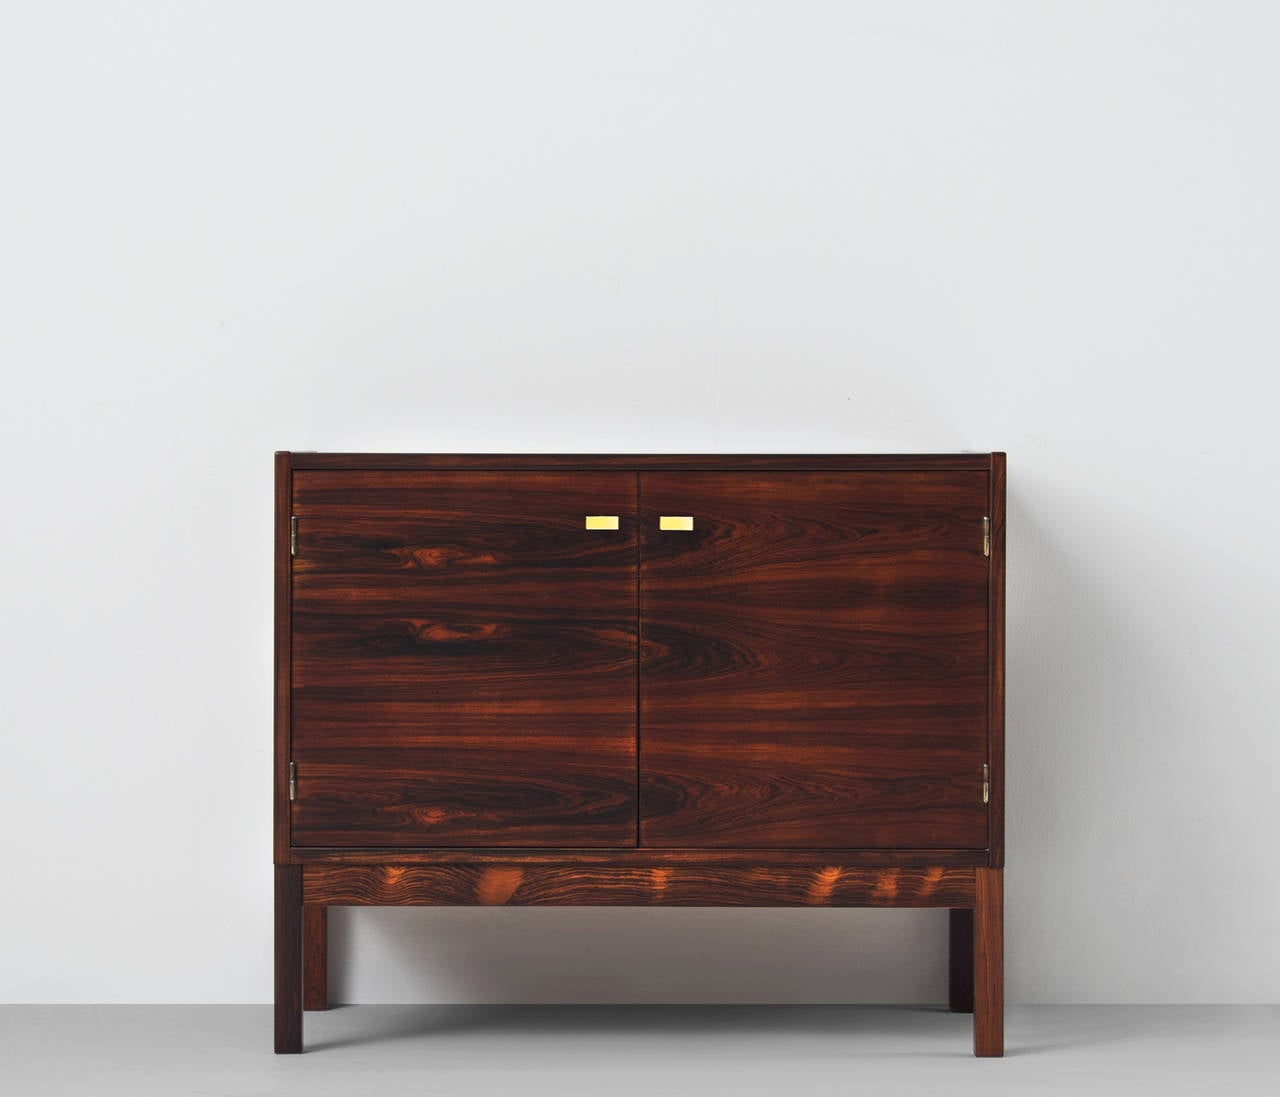 Scandinavian Modern Small Sideboard Made of Rosewood with Brass Details